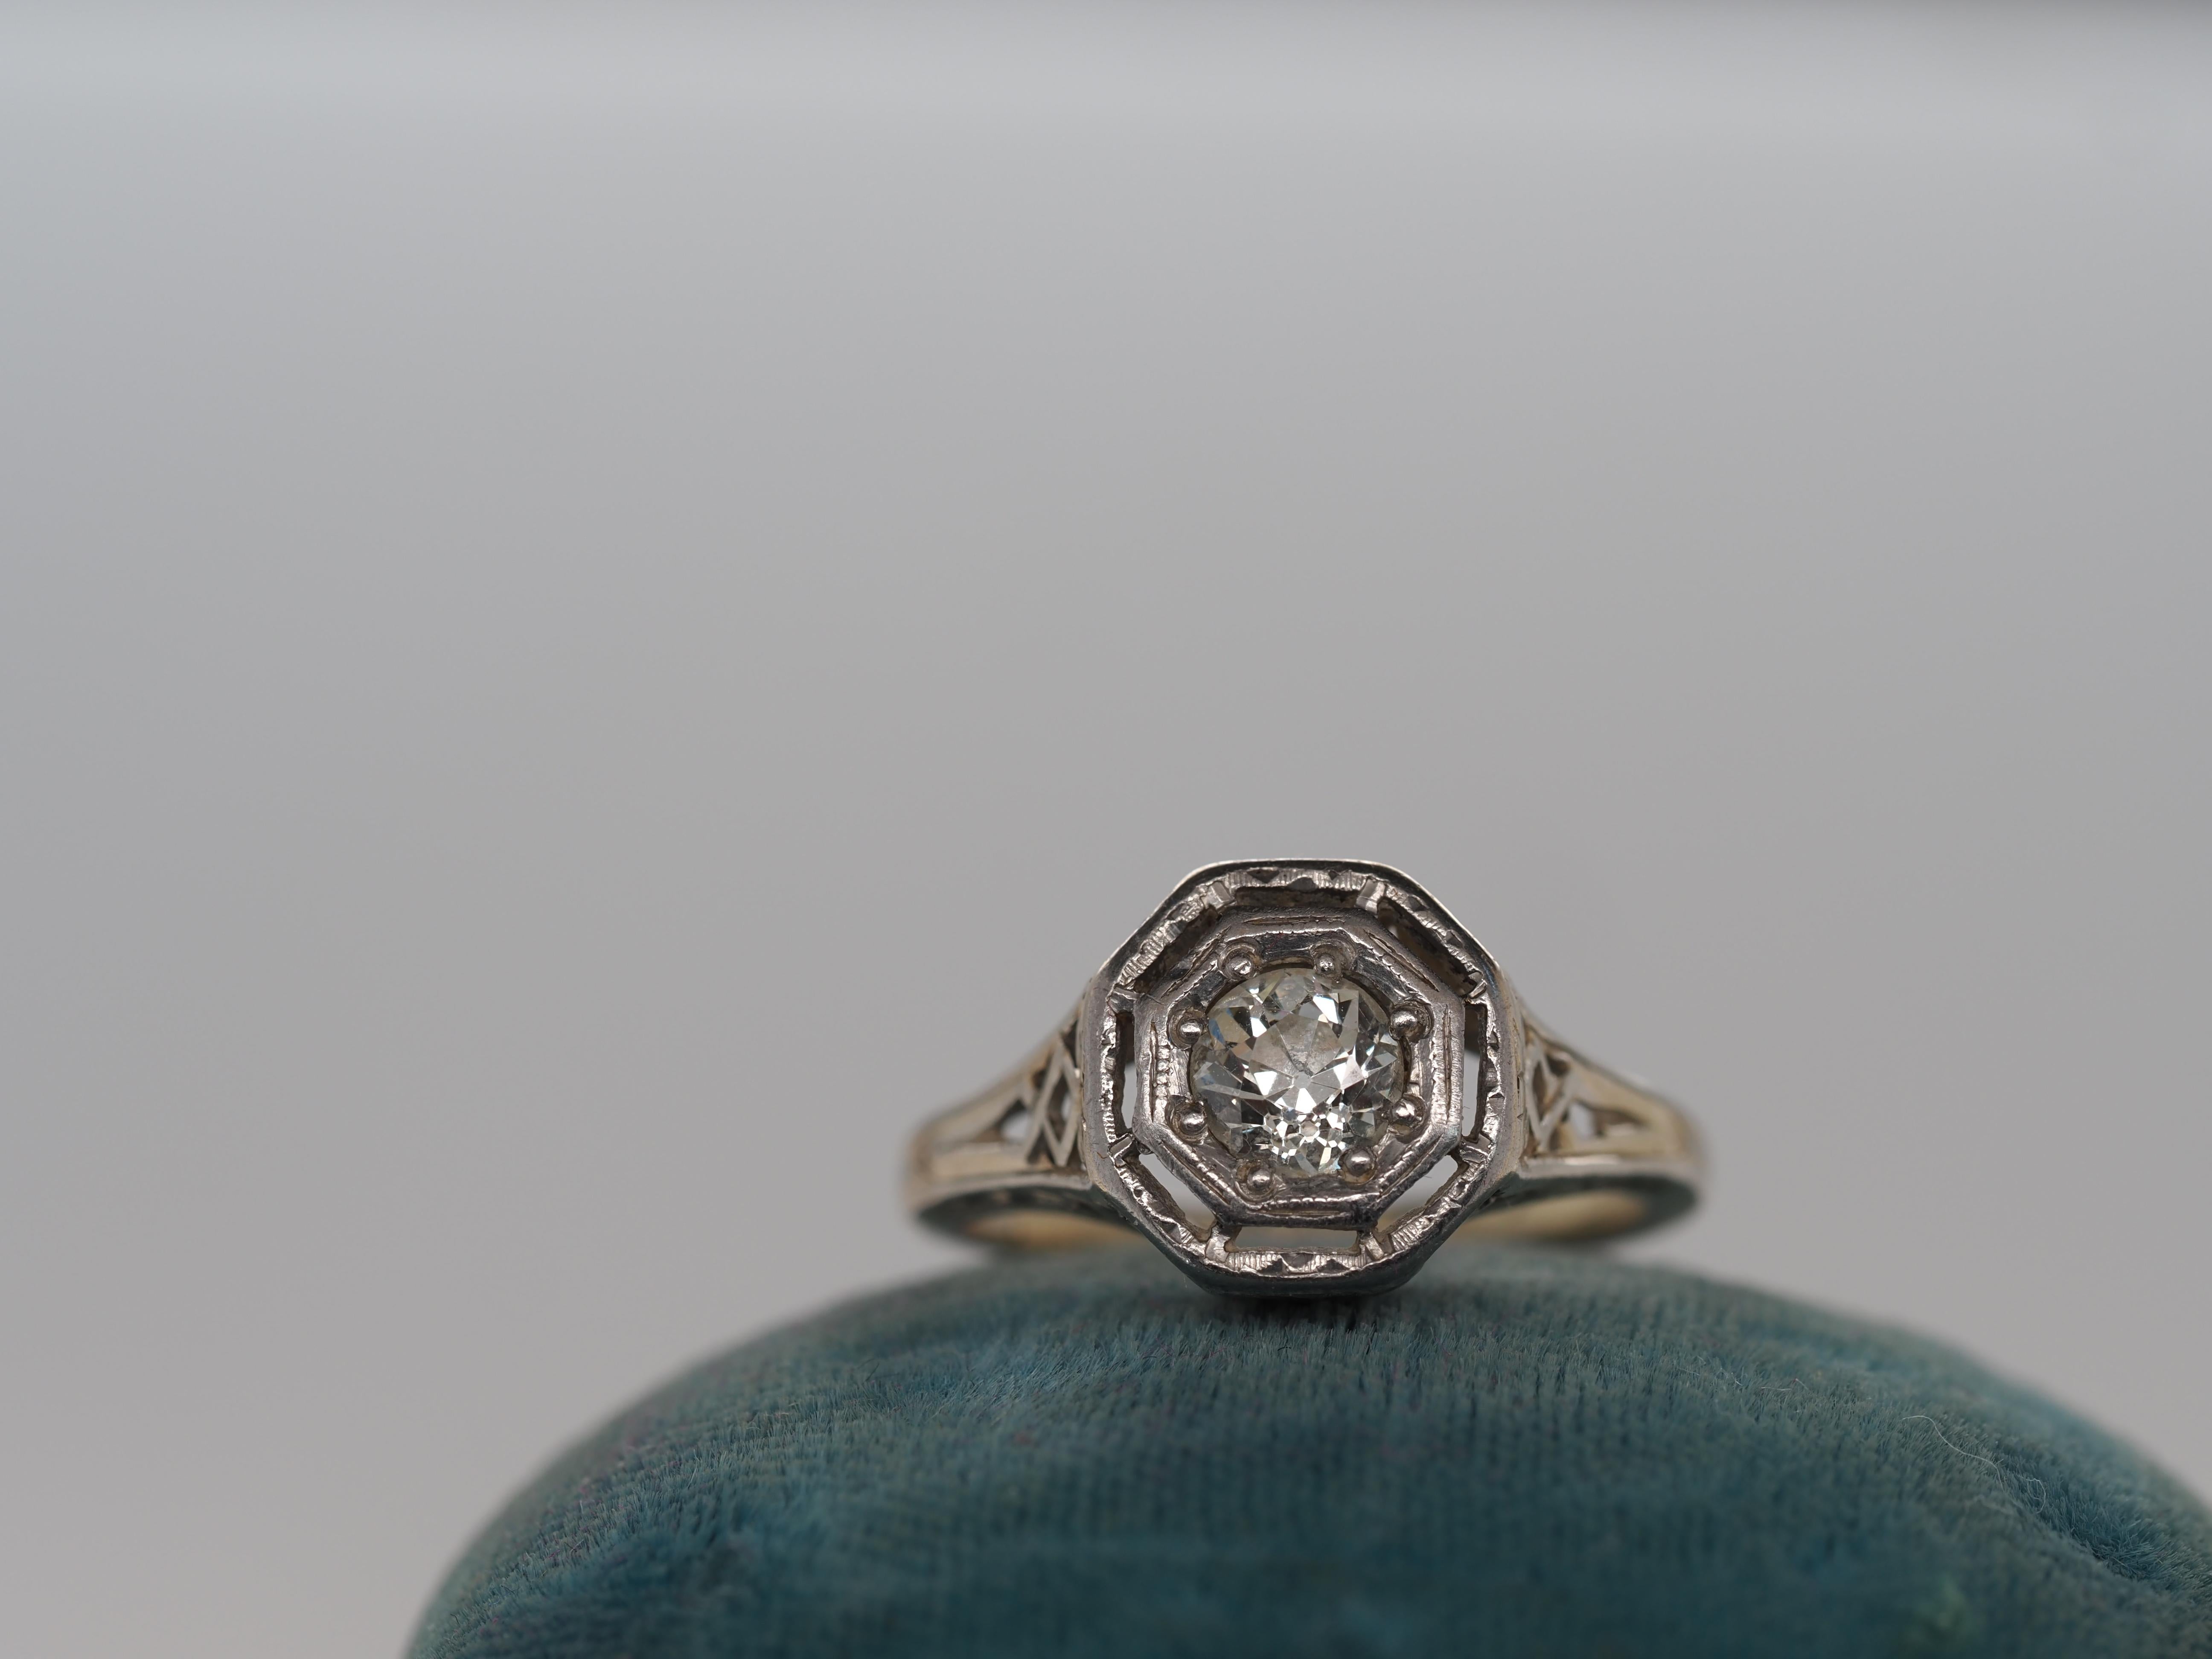 Item Details:
Ring Size: 4.25
Metal Type: 14k White Gold [Hallmarked, and Tested]
Weight: 3.3 grams
Diamond Details: .20ct, Old European Brilliant, H-I, SI clarity
Band Width: 1.6 mm
Condition: Excellent